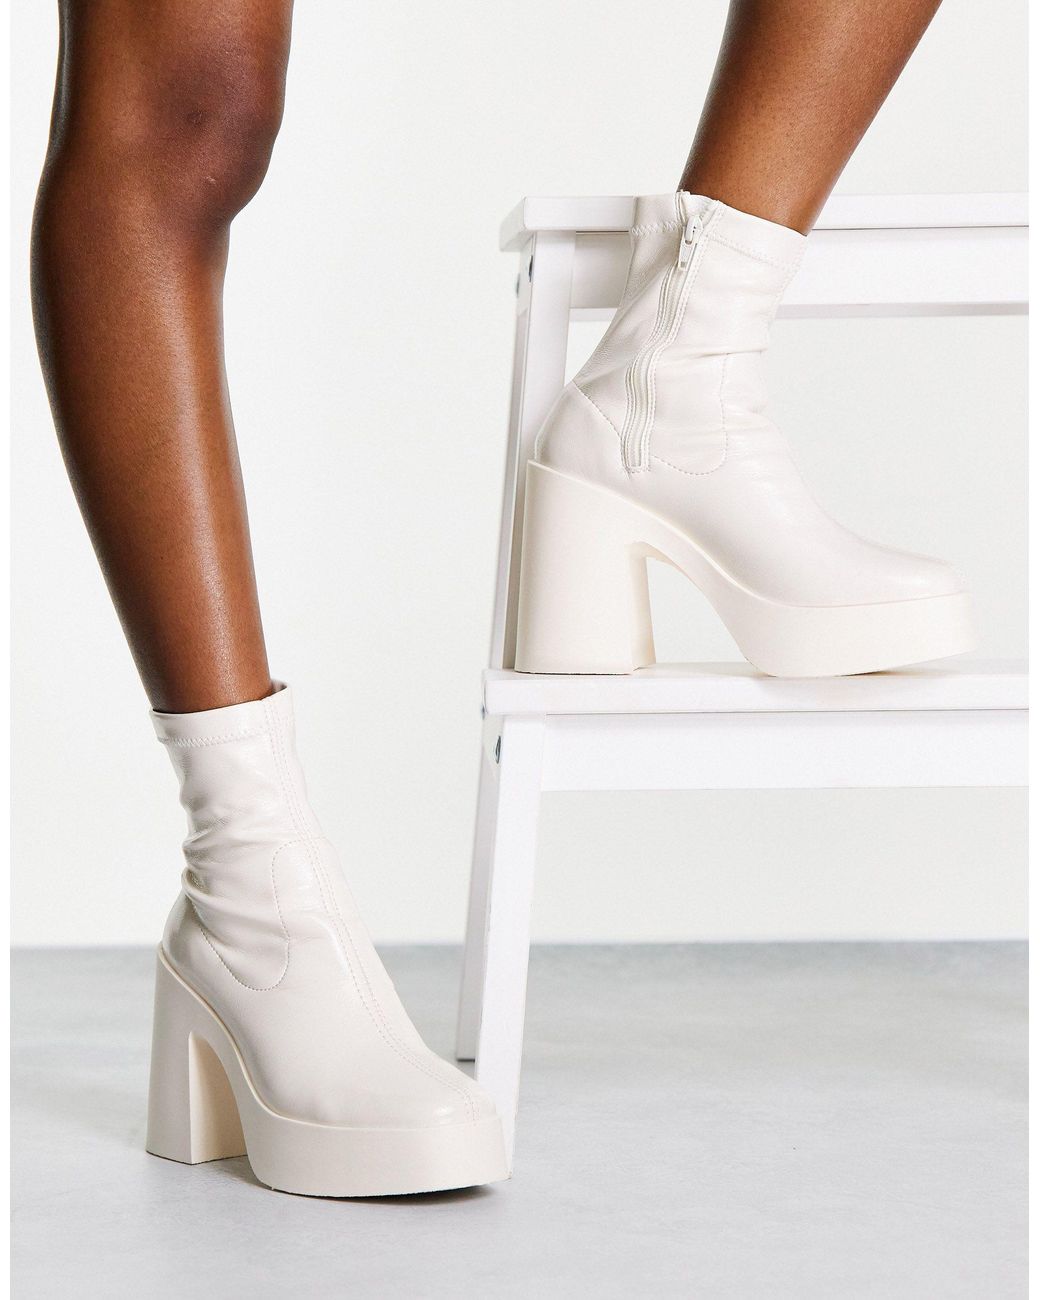 ASOS Elsie High Heeled Sock Boots in White | Lyst